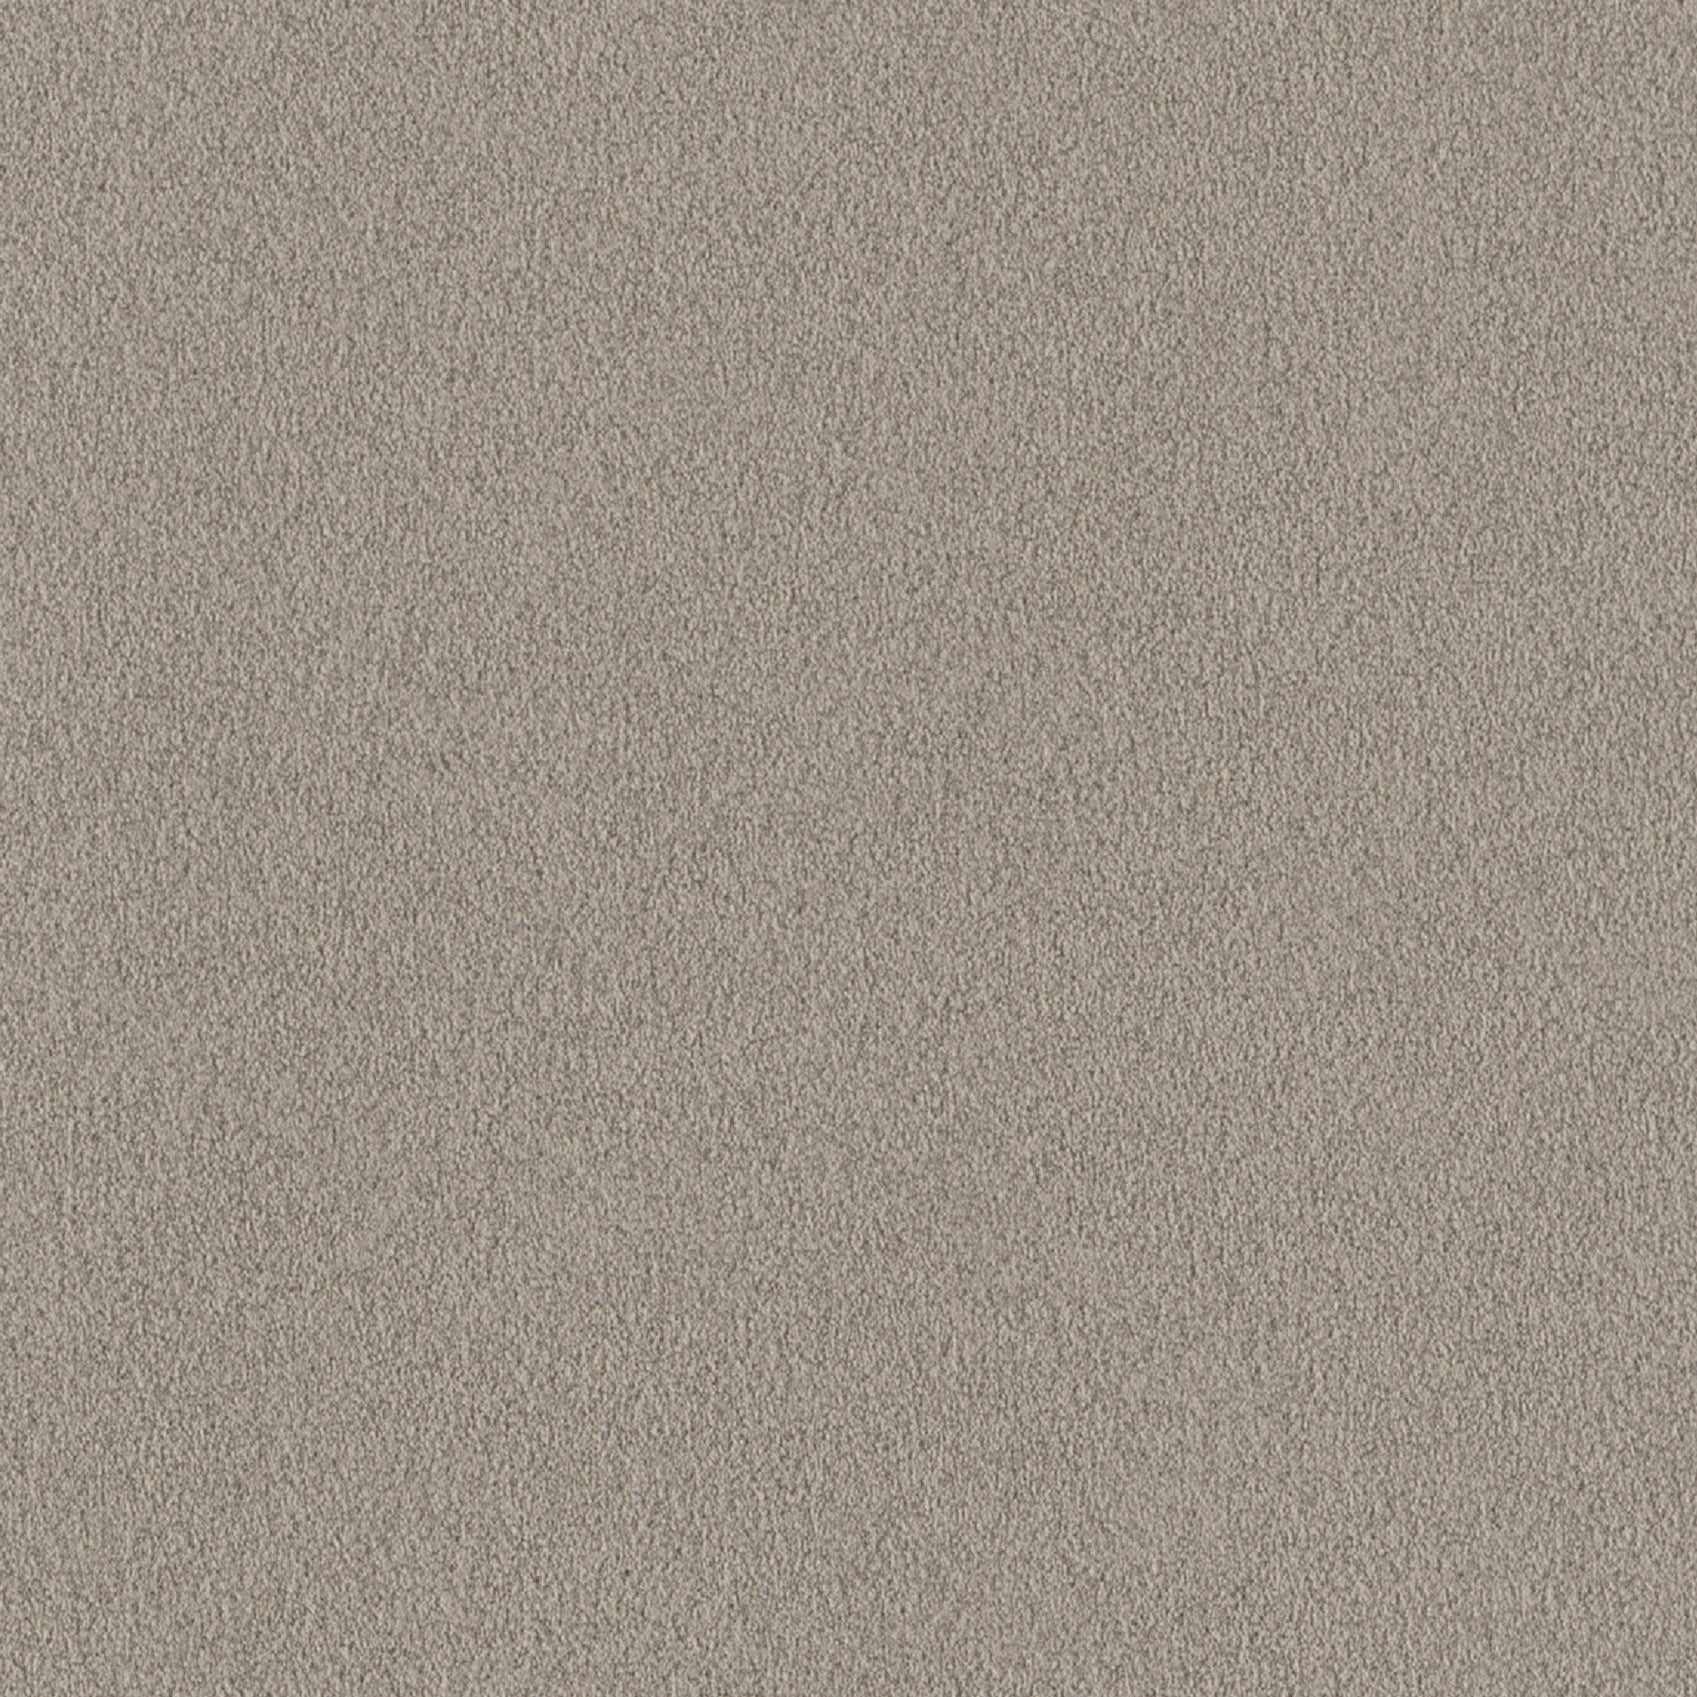 Andriali-Contract-Vinyl_Upholstery-Design-Serenity-Color-020Beaver-Width-140cm